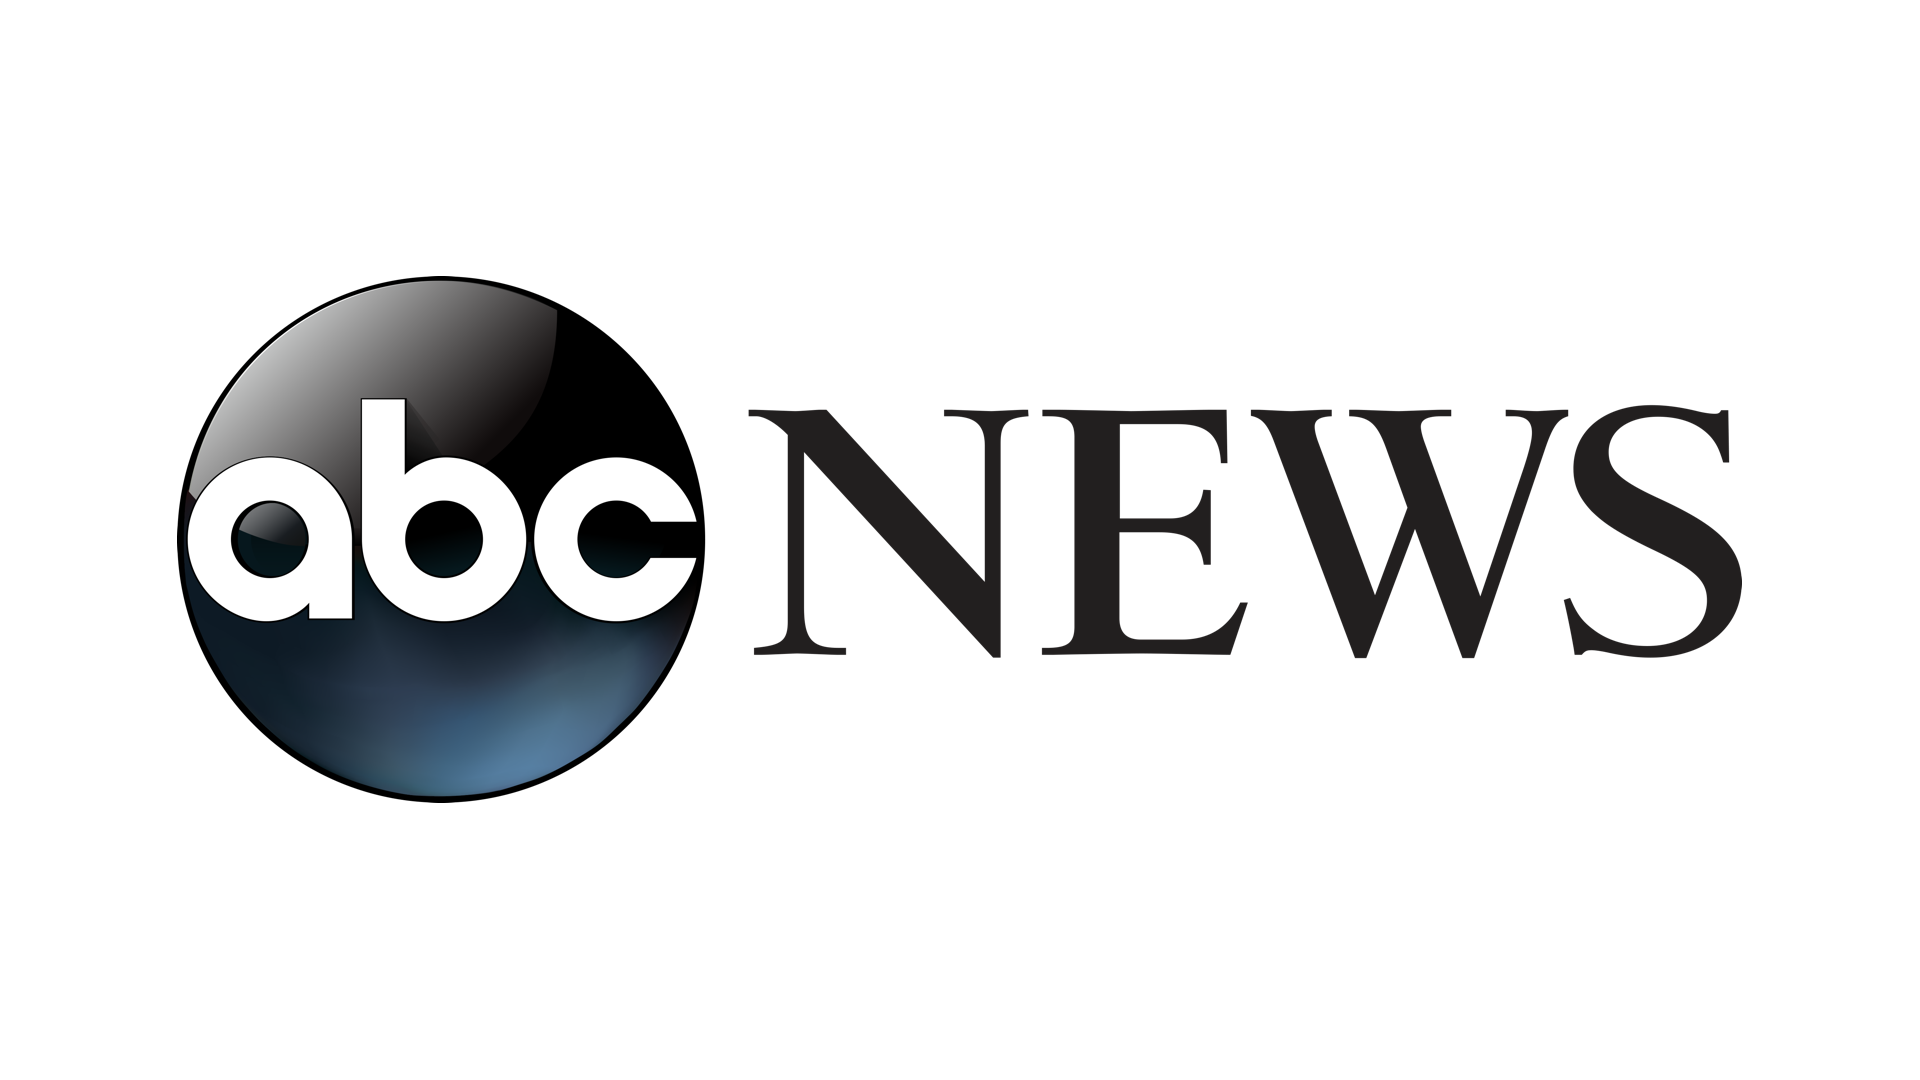 Ken Wisnefski discussed the importance of branding with ABC News